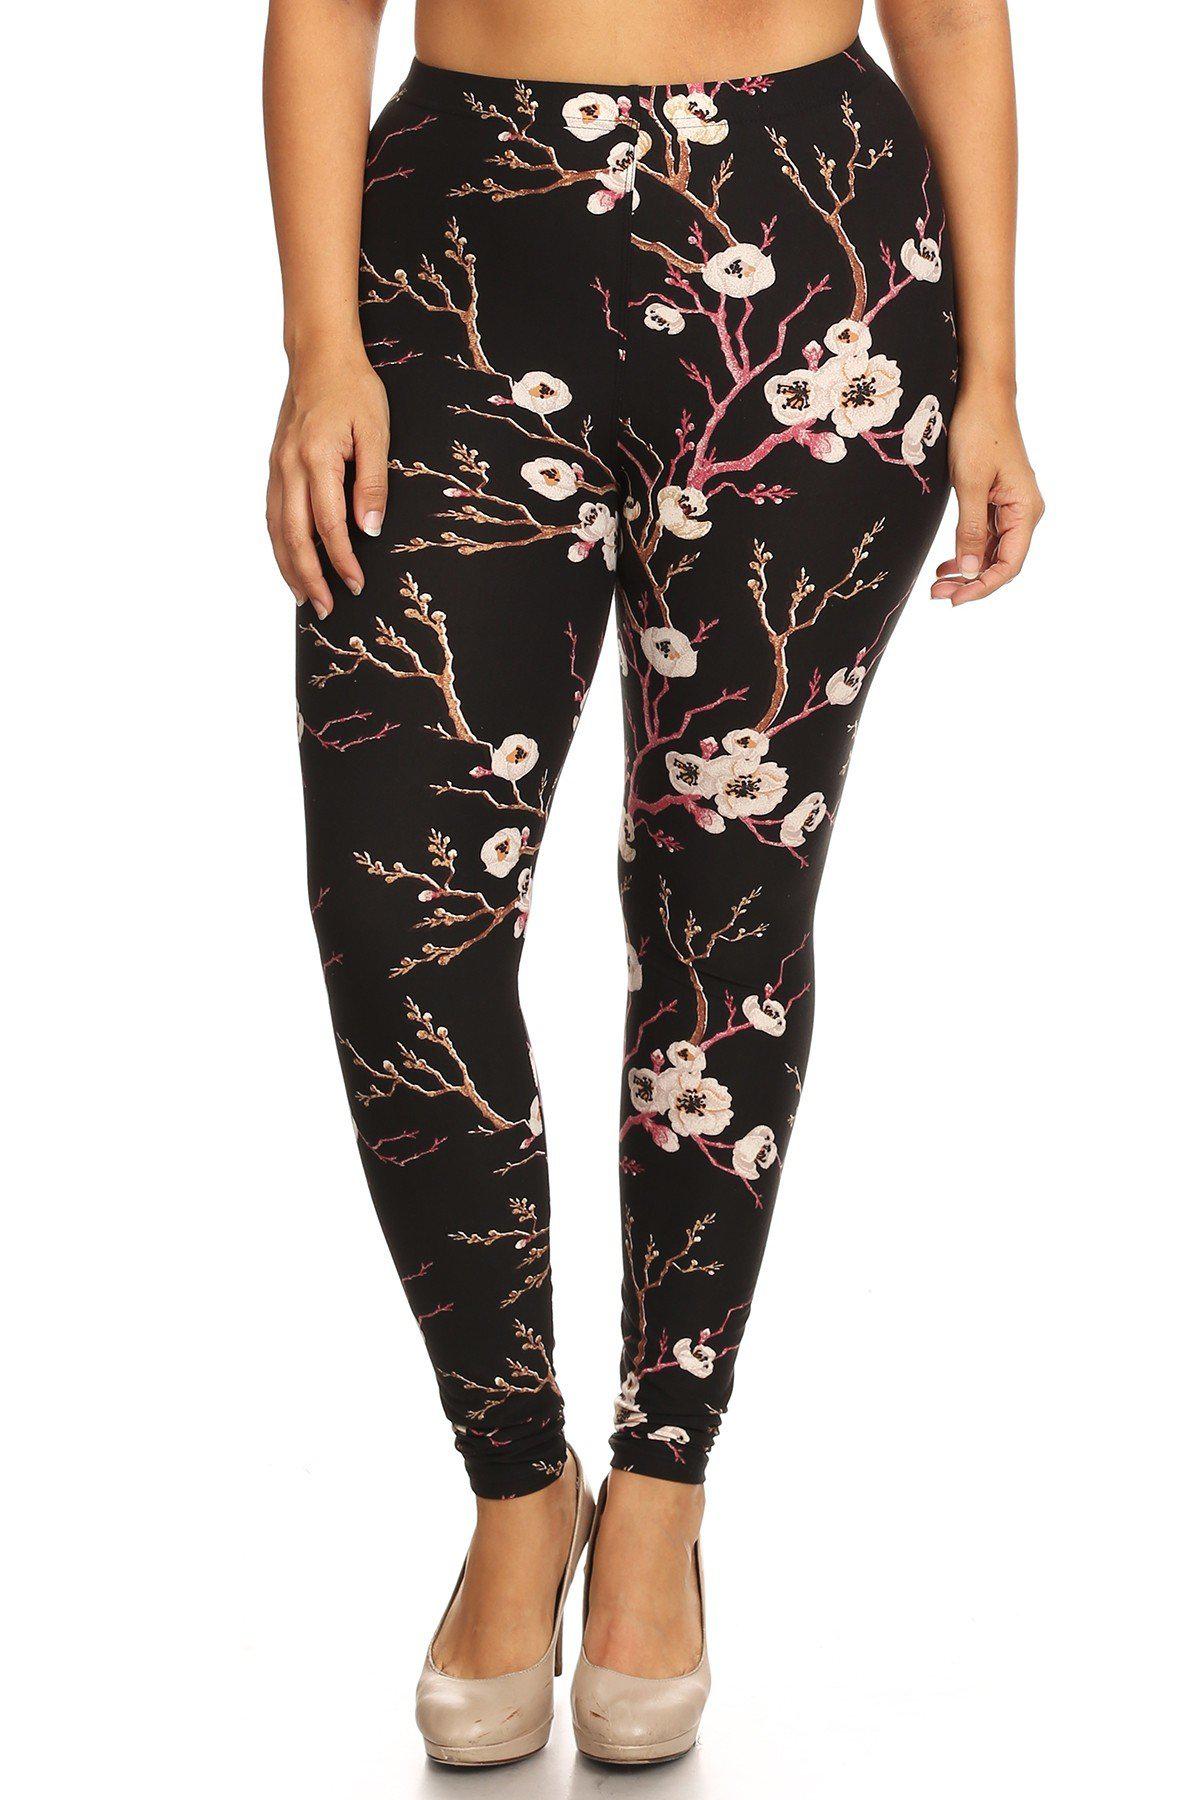 Plus Size Floral Print, Full Length Leggings In A Slim Fitting Style With A Banded High Waist-[Adult]-[Female]-Multi-Blue Zone Planet